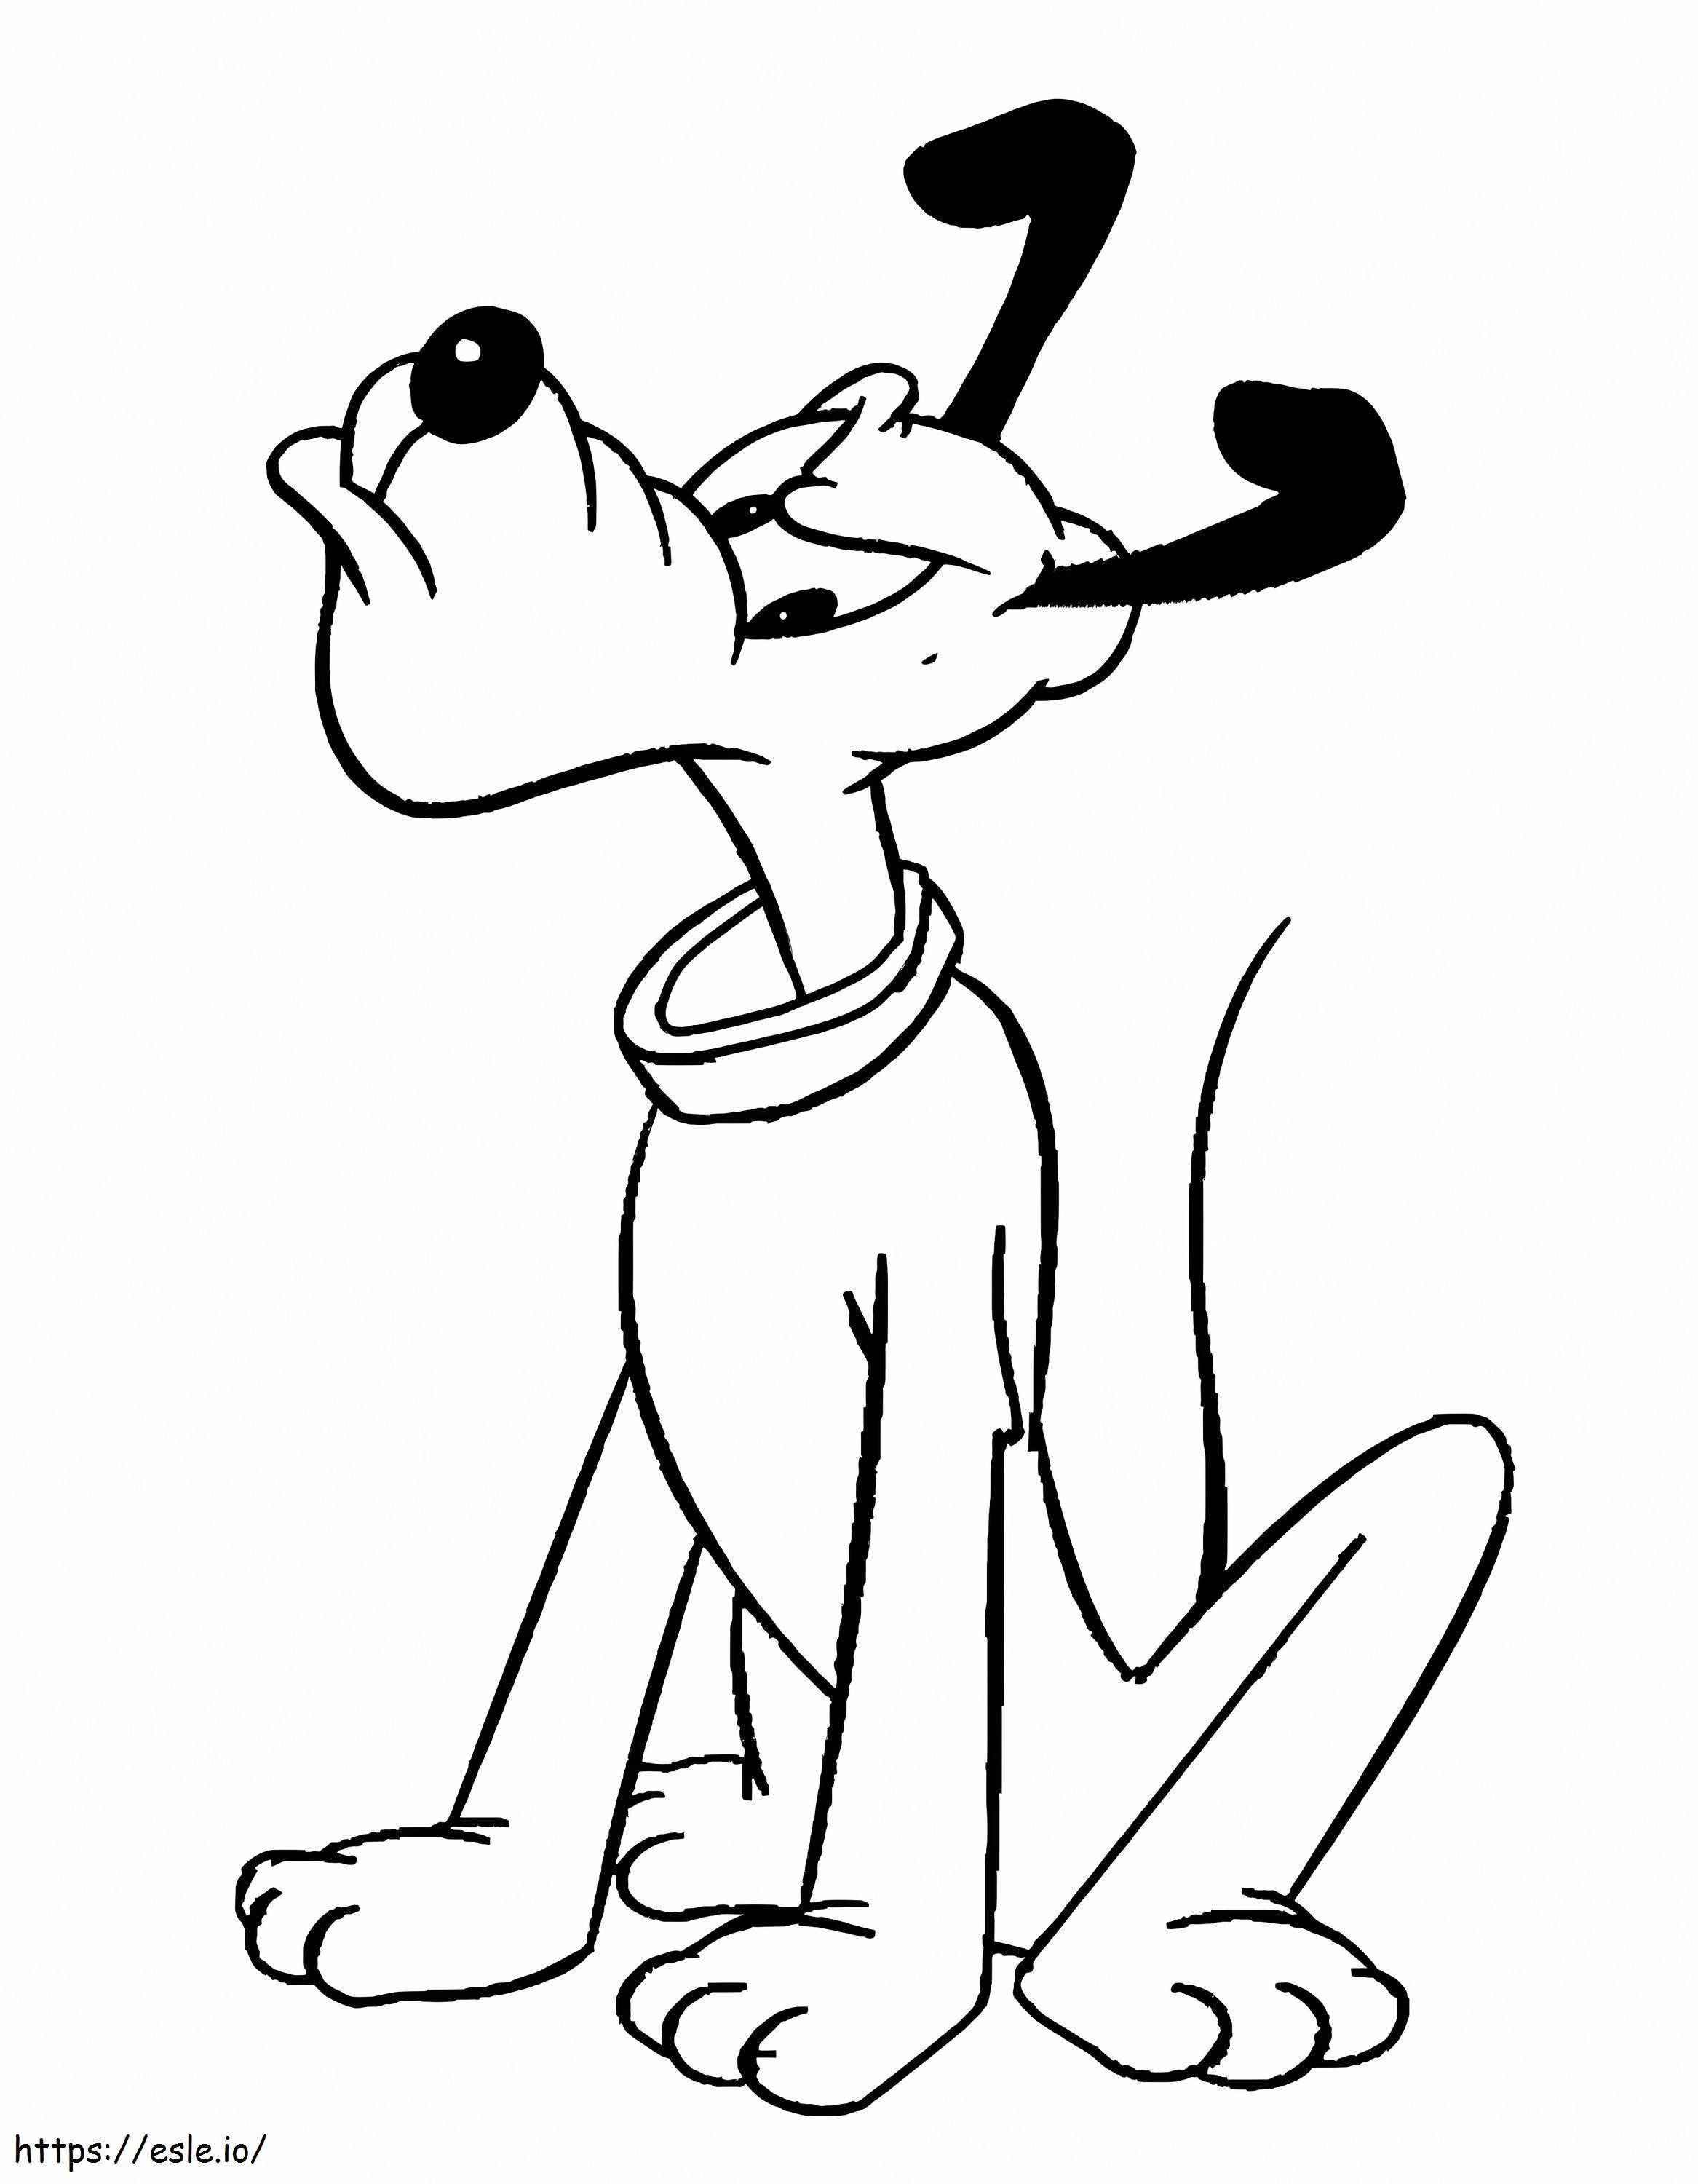 Angry Pluto coloring page